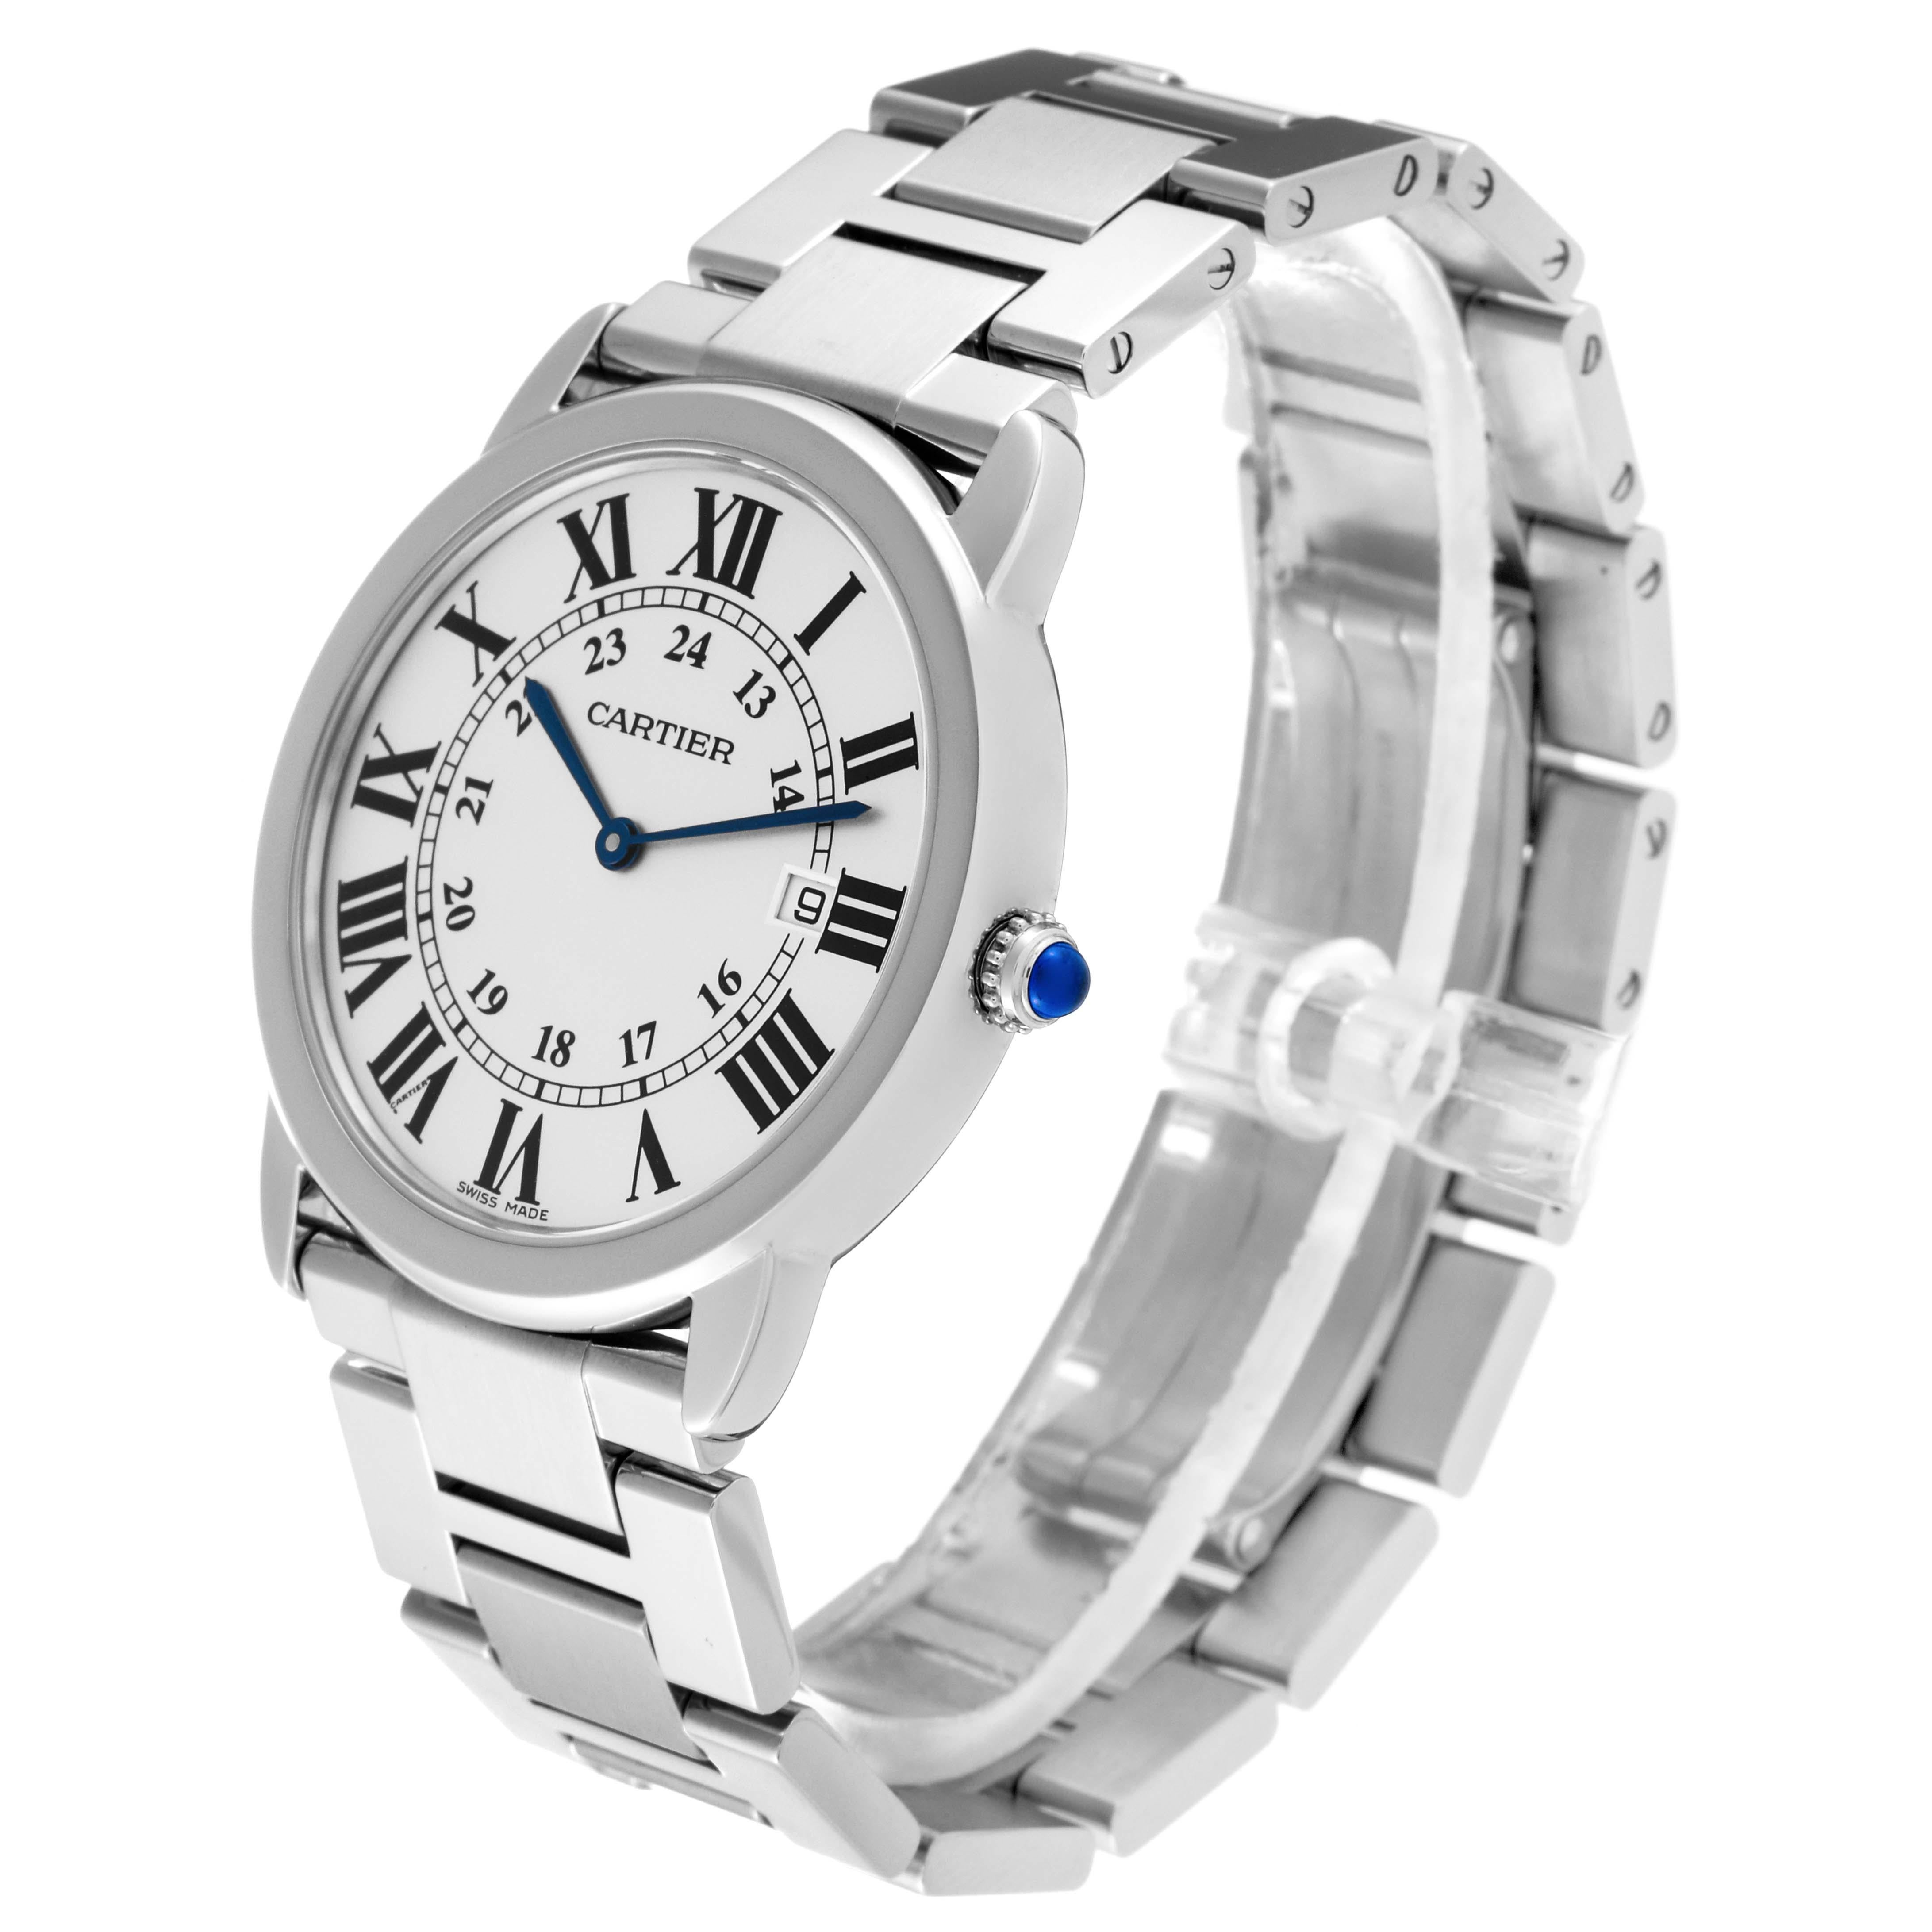 Cartier Ronde Solo Large 36mm Steel Mens Watch W6701005. Quartz movement. Stainless steel case 36.0 mm in diameter. Circular grained crown set with blue spinel cabochon. . Scratch resistant sapphire crystal. Silvered opaline dial with black Roman